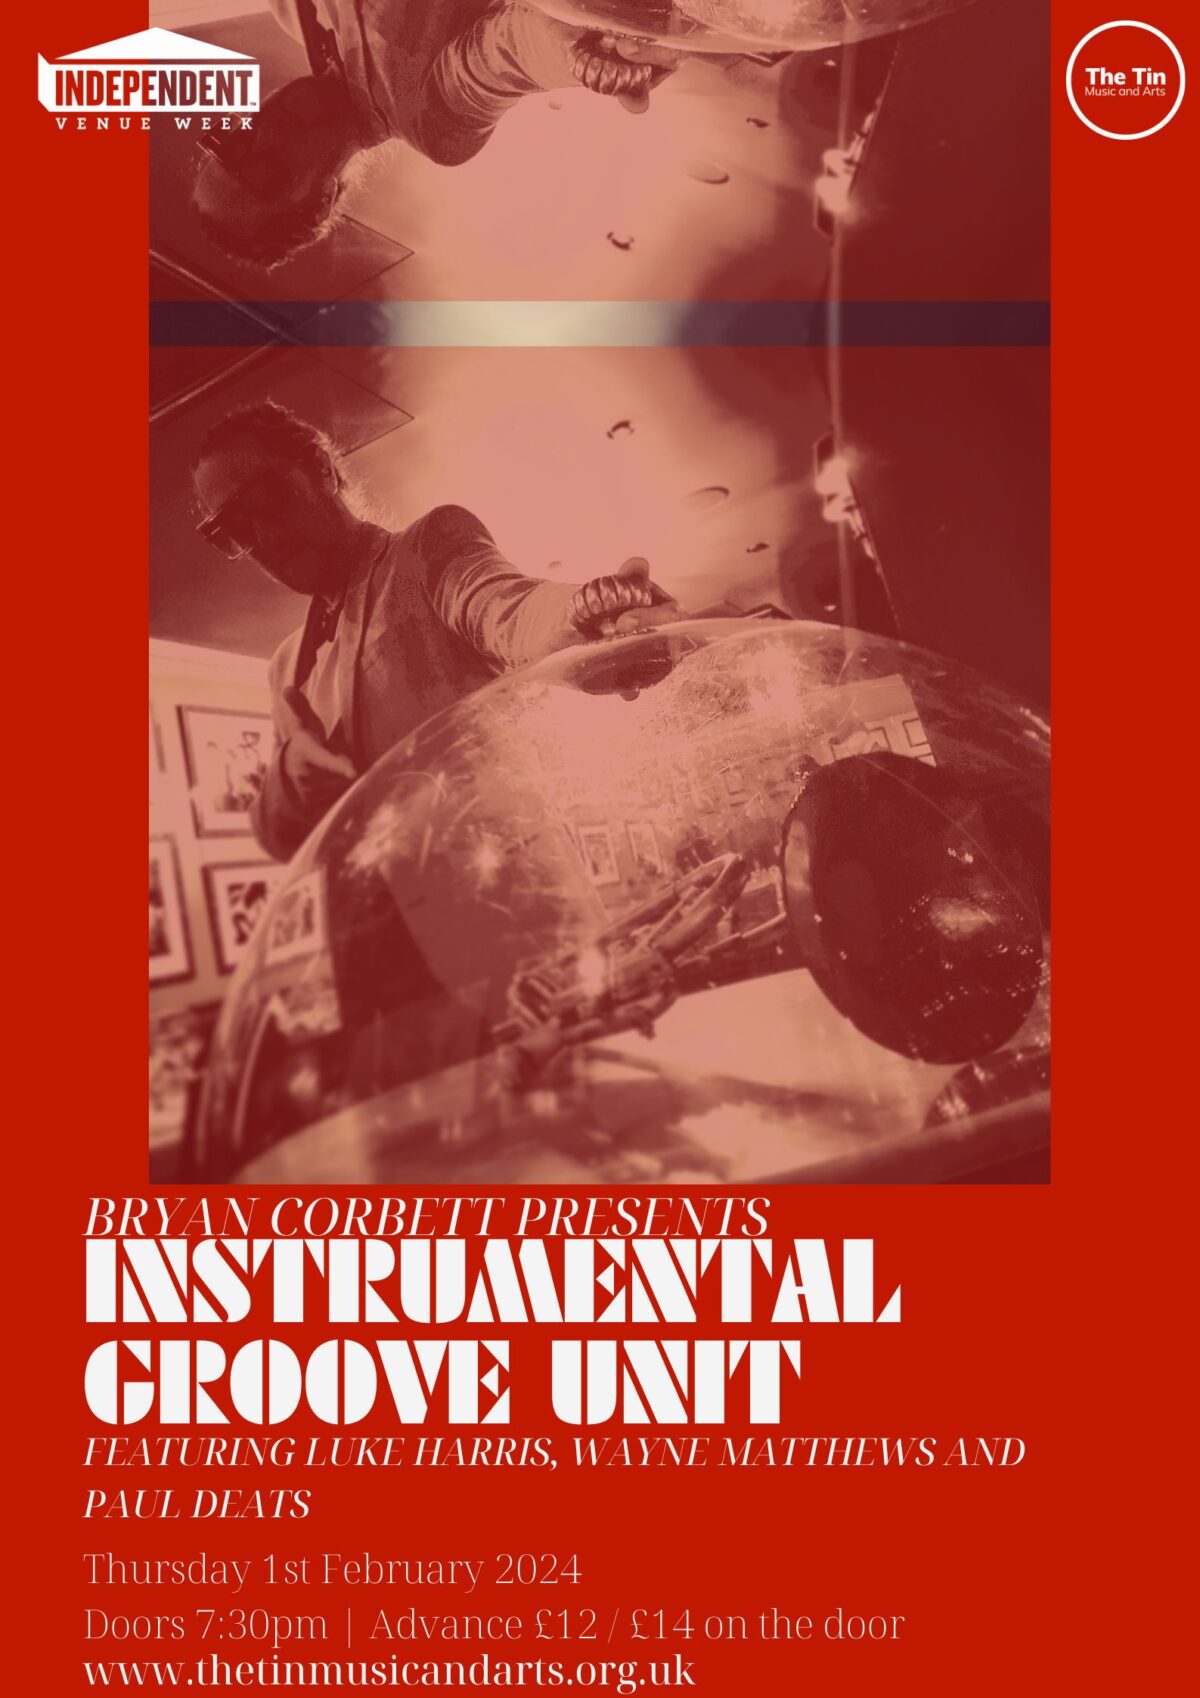 Poster for Bryan Corbett presents Instrumental Groove Unit at The Tin Music and Arts on Thursday 1st February. Advance tickets are £12, doors are at 7.30pm.